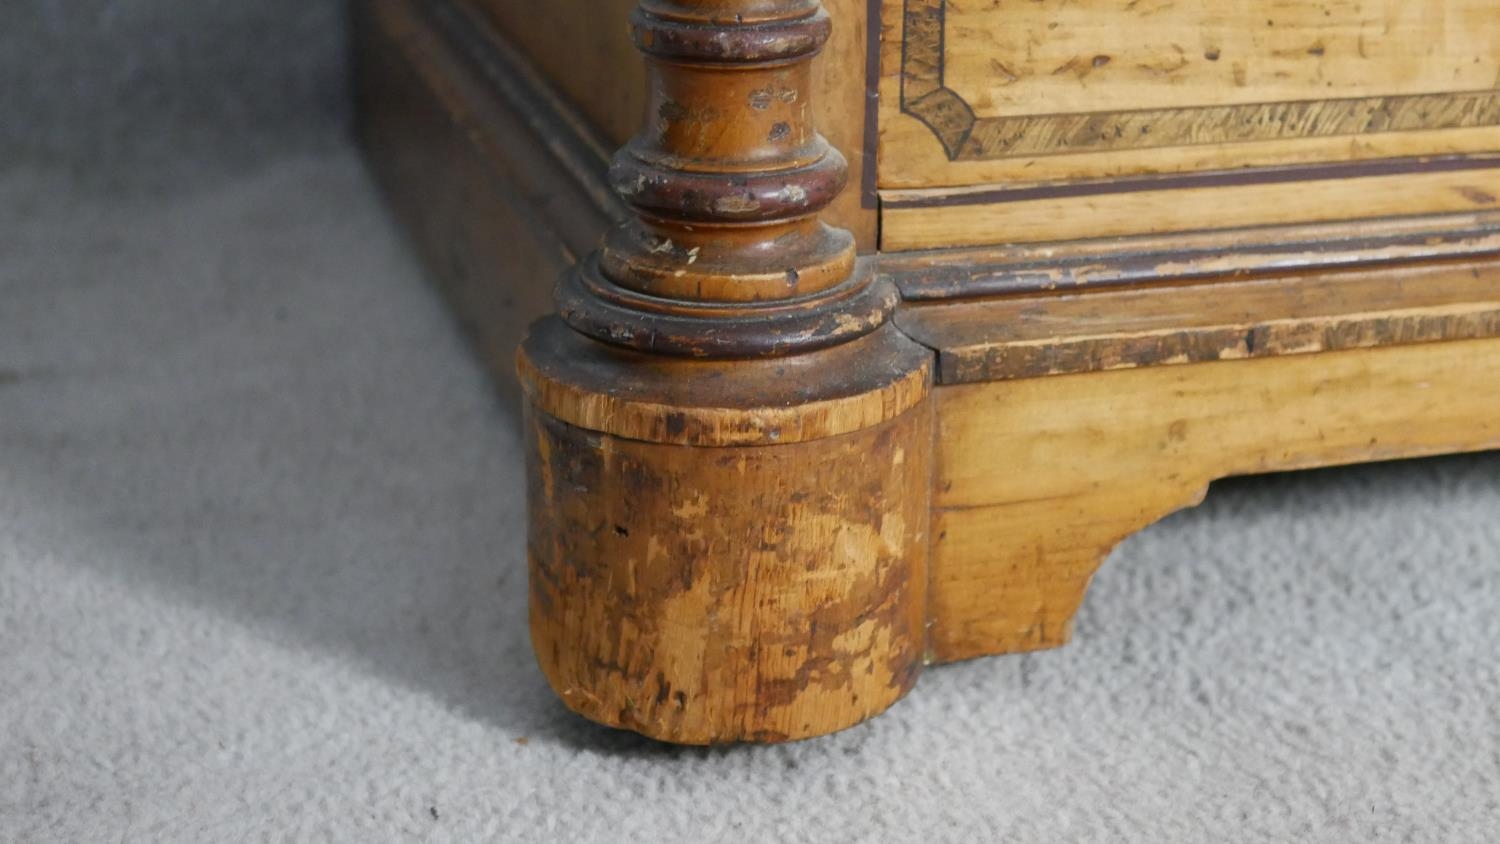 A late Victorian Aesthetic movement pitch pine chest of drawers with painted and ebonised decoration - Image 7 of 8